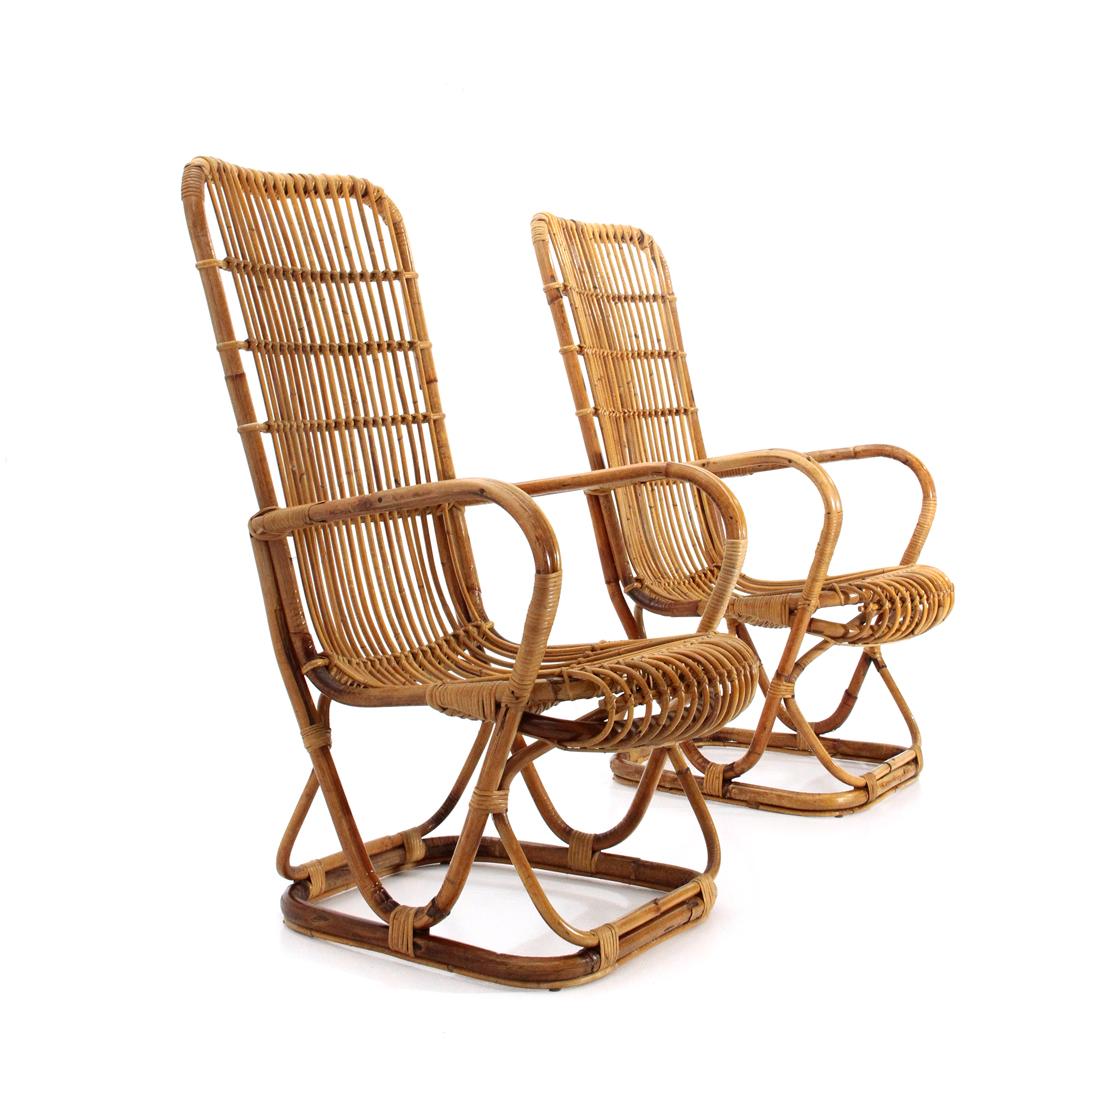 Pair of Italian-made rattan armchairs produced in the 1950s.
Curved bamboo structure.
Seat and knots in rattan.
Good general conditions, some signs due to normal use over time.

Dimensions: Length 61 cm, depth 70 cm, height 110 cm, seat height